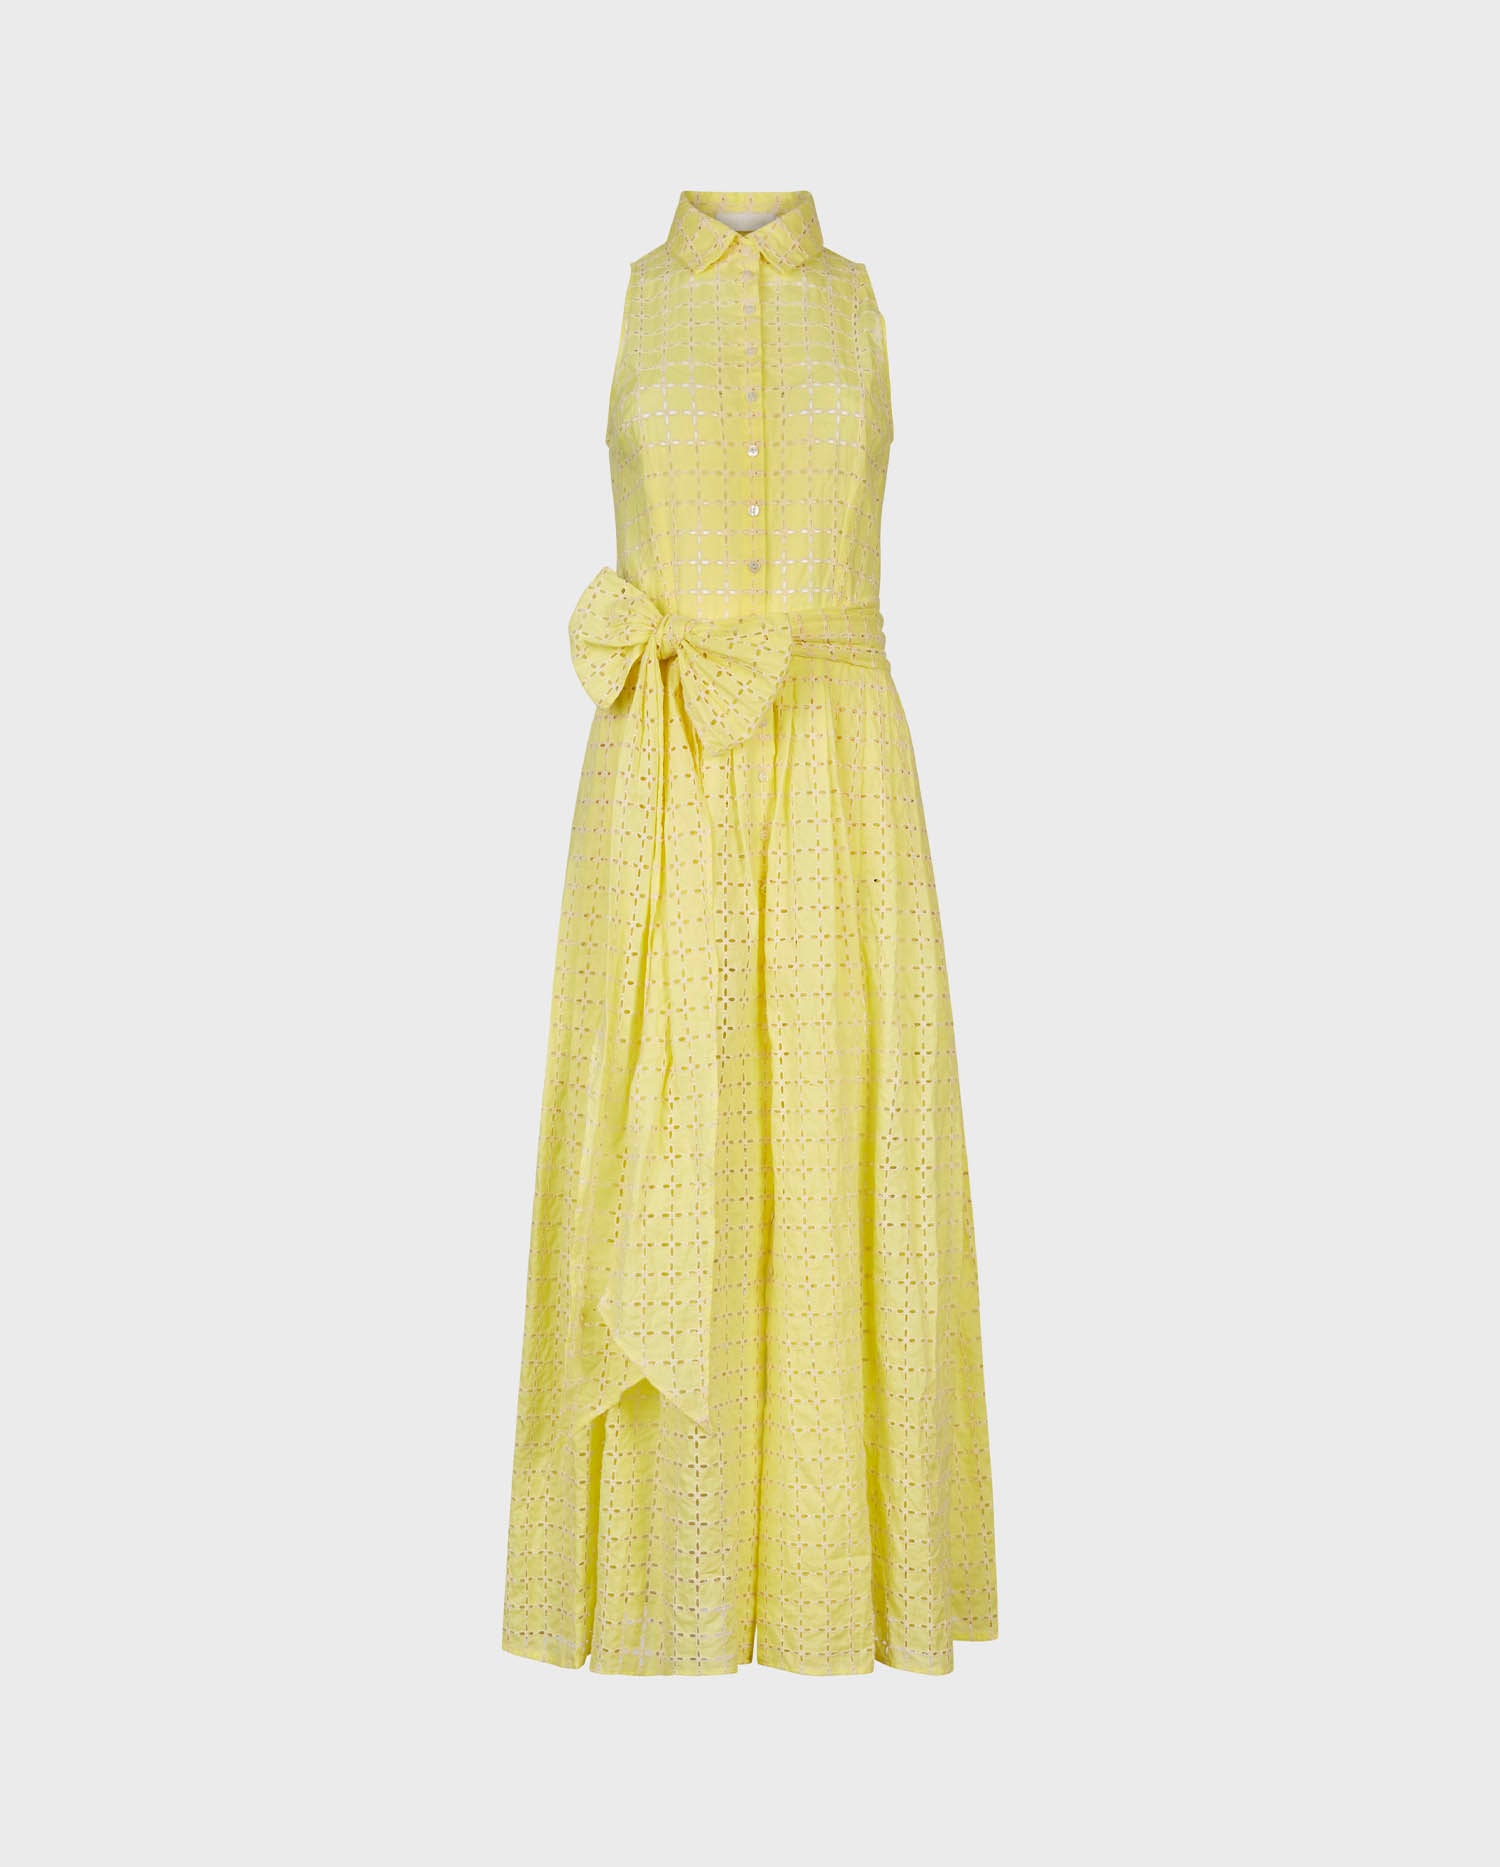 Shop the GUETHARY Yellow Belted Embroidered Maxi Dress Type Summer Shirtdress from designer Anne Fontaine